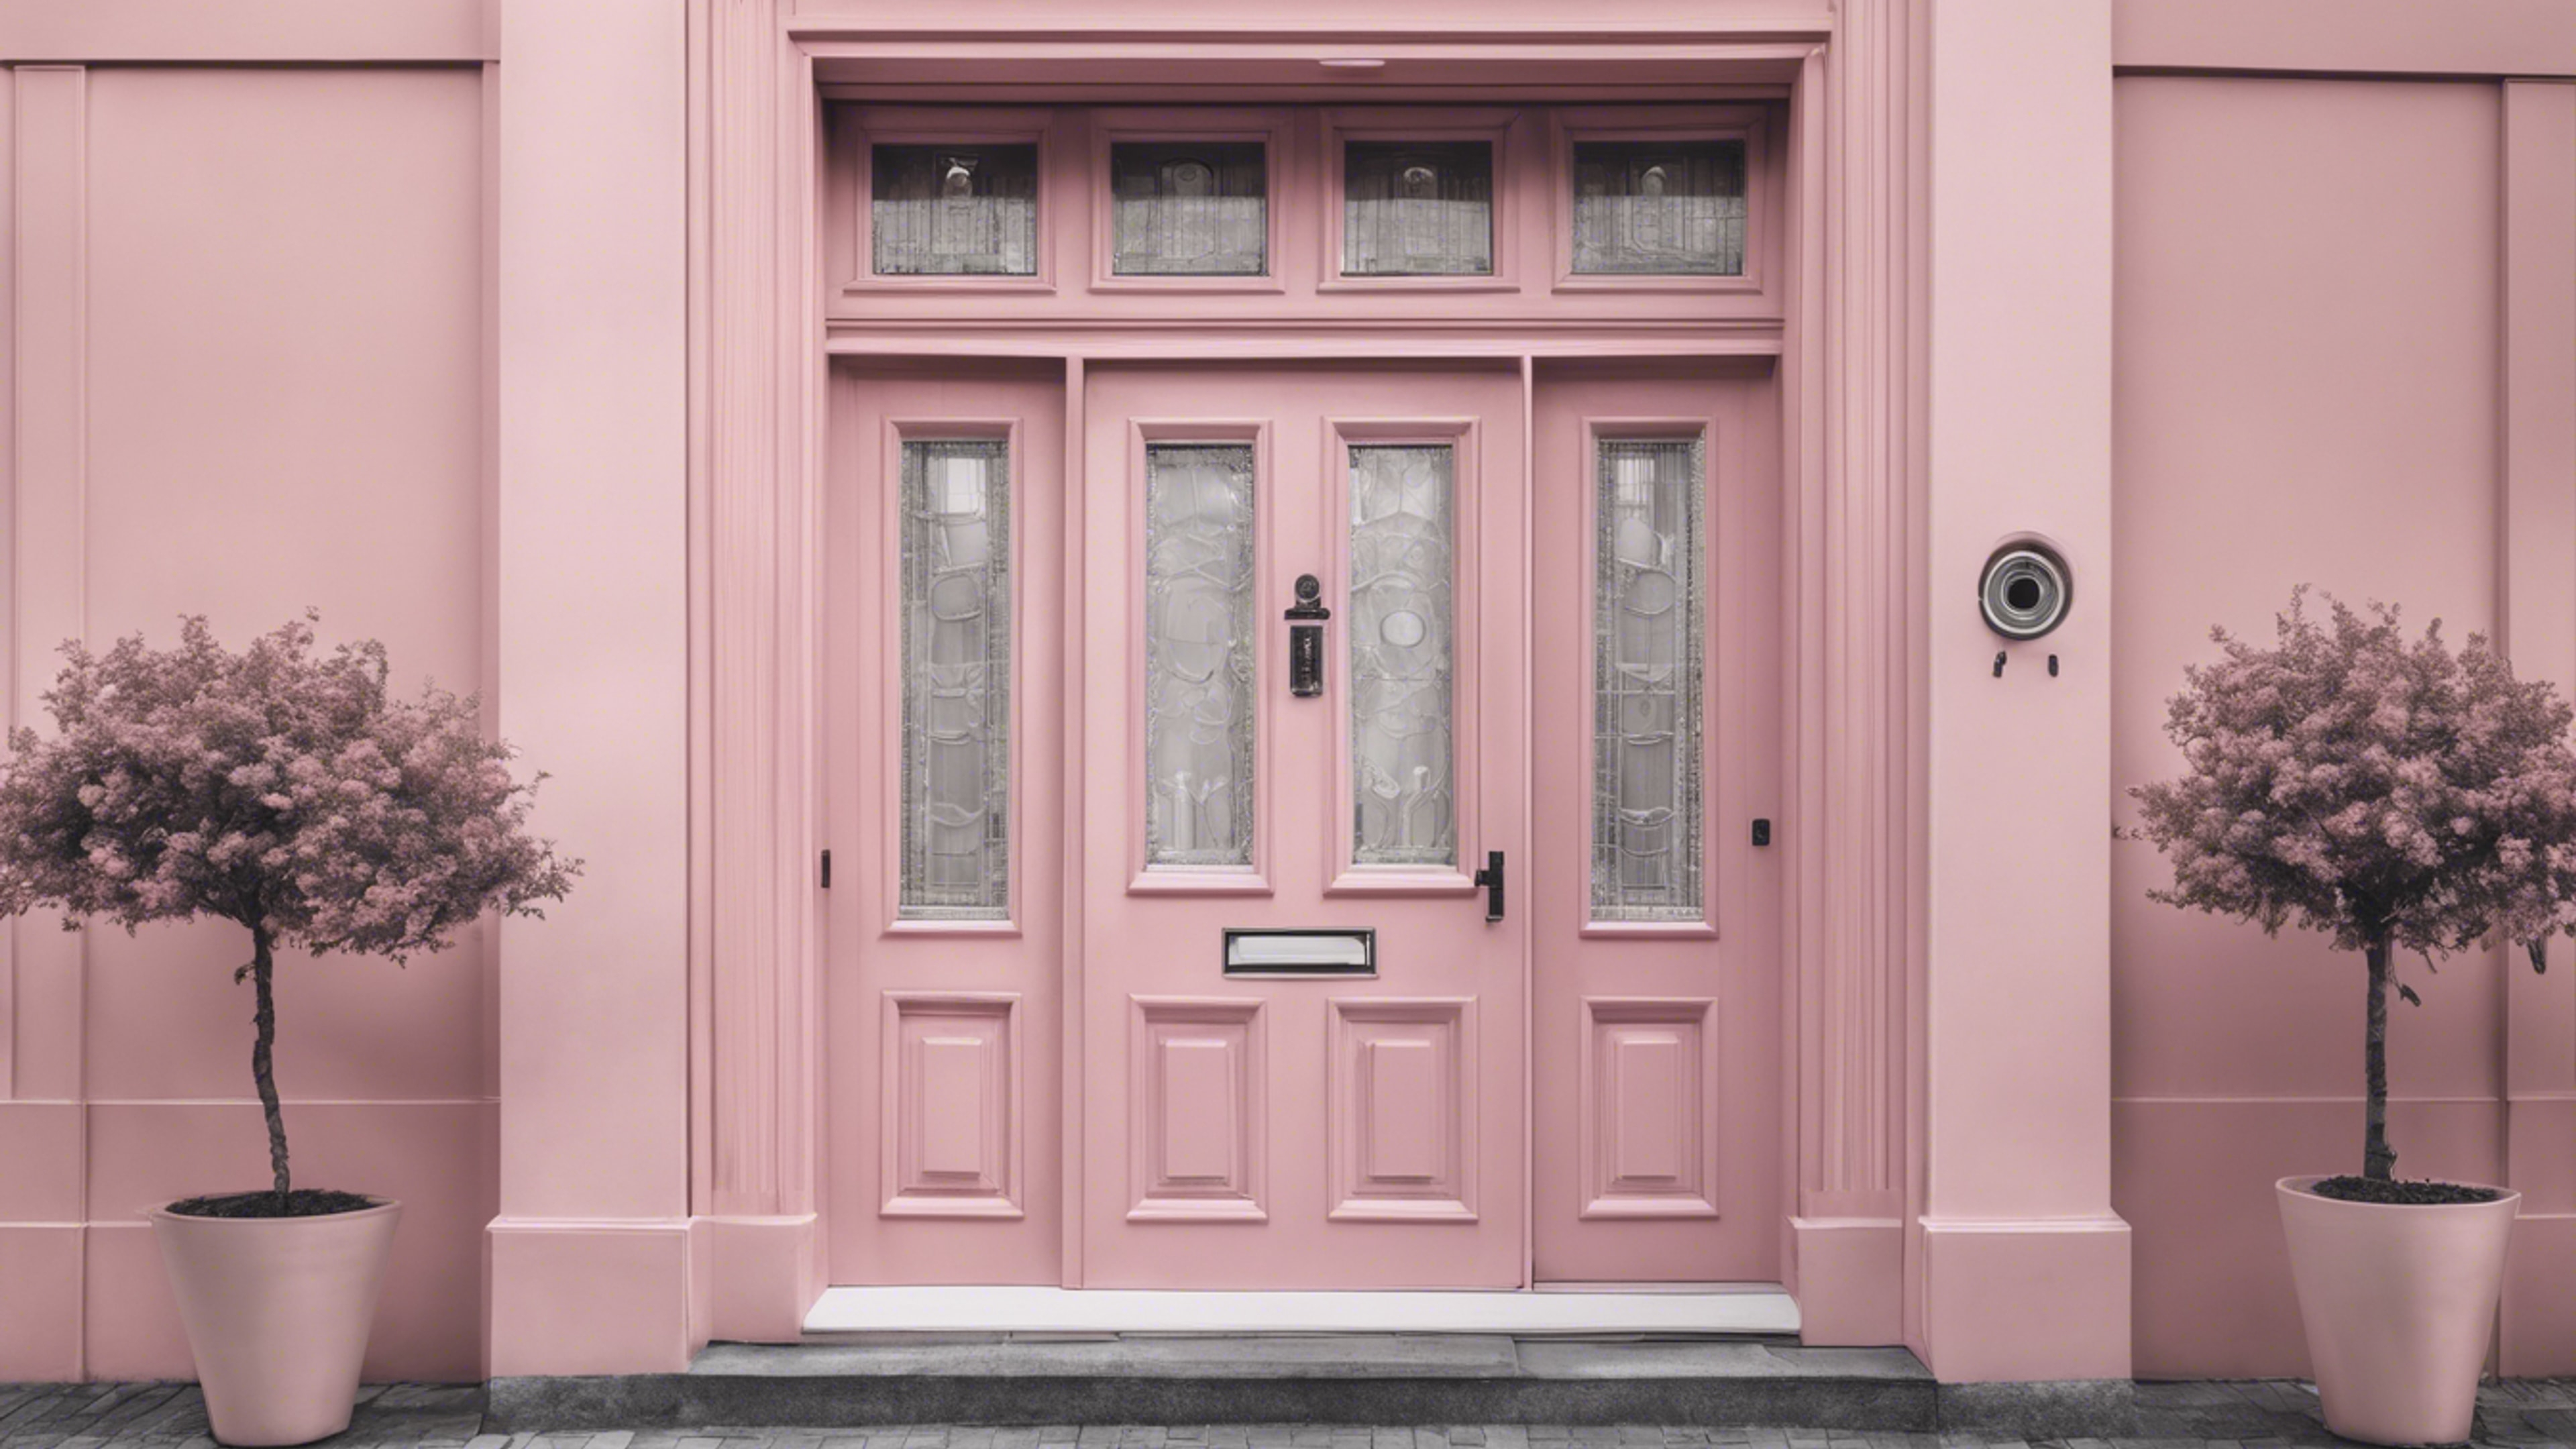 Monochrome image of a sophisticated townhouse door painted in a fetching preppy pastel pink. Шпалери[a9cdce63c1c94c029691]